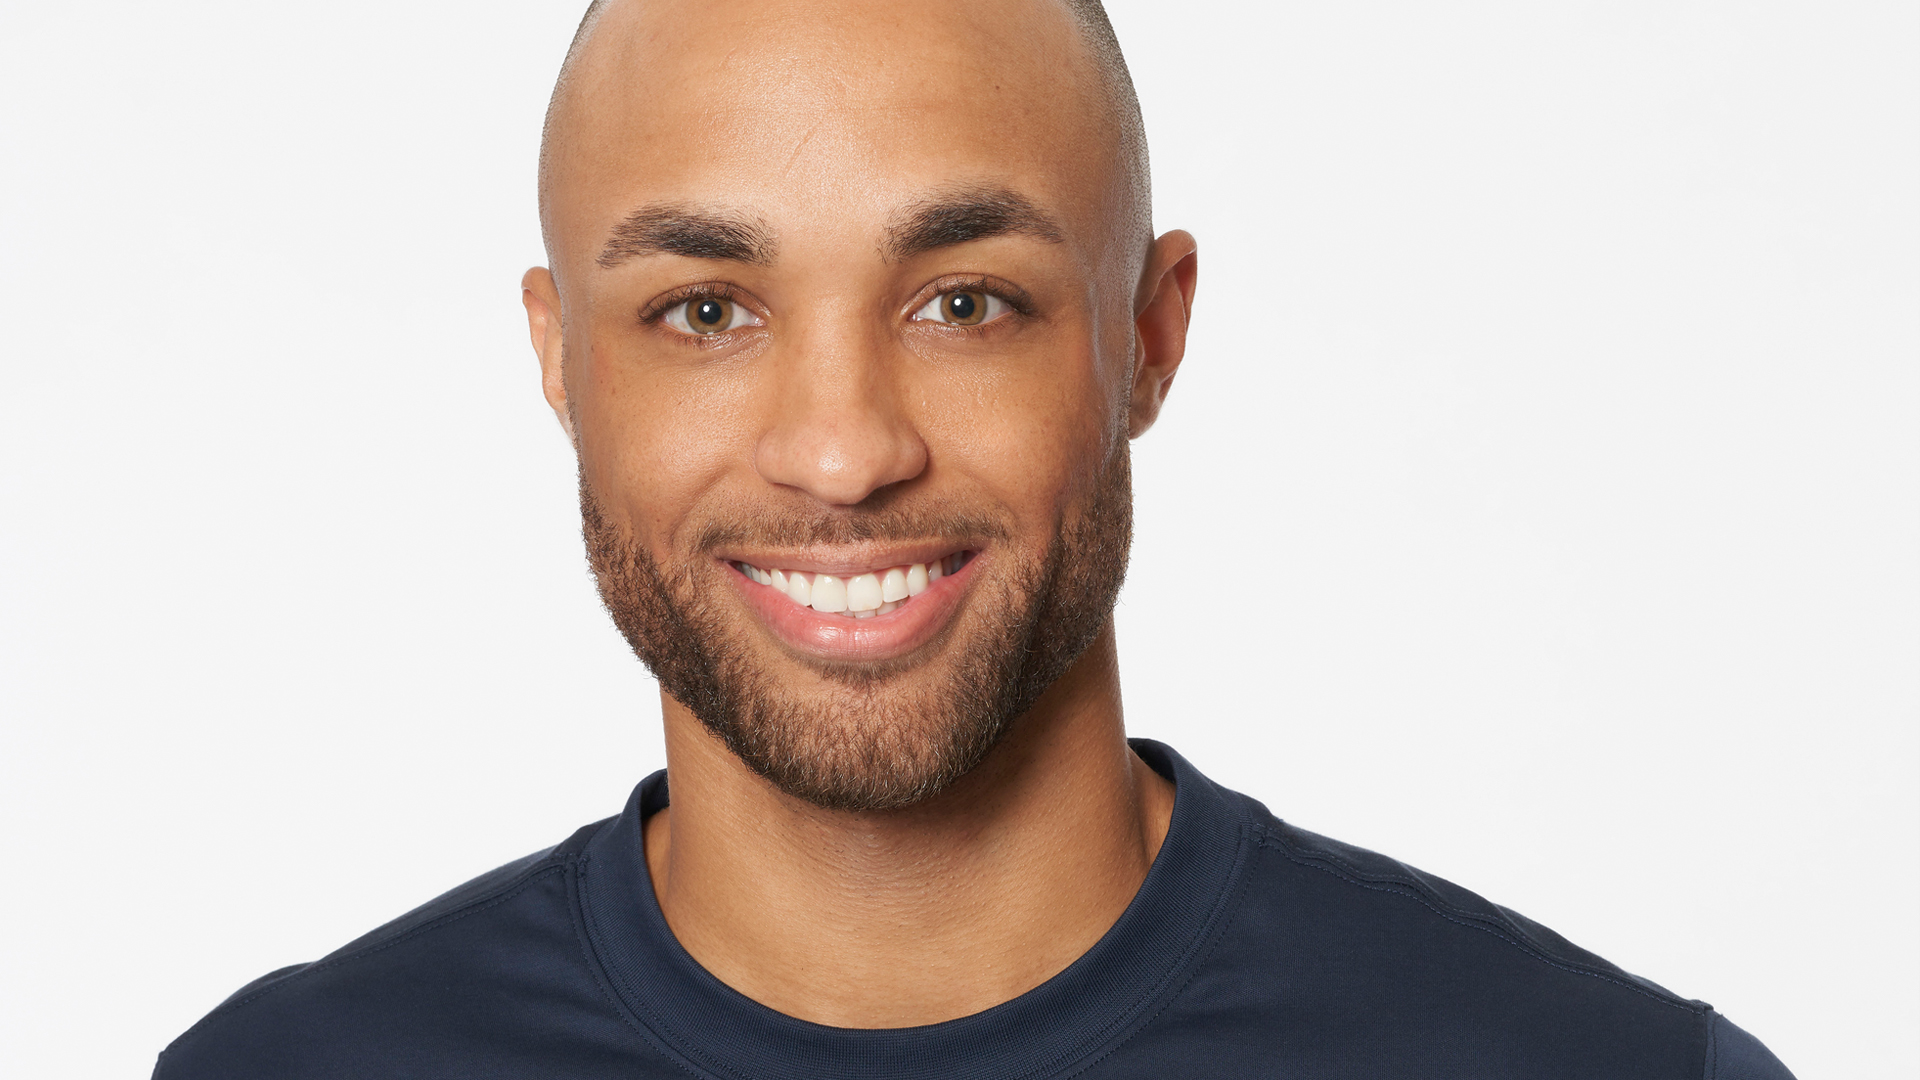 Headshot of Joe Coleman from ‘The Bachelorette’ Season 18 with Michelle Young